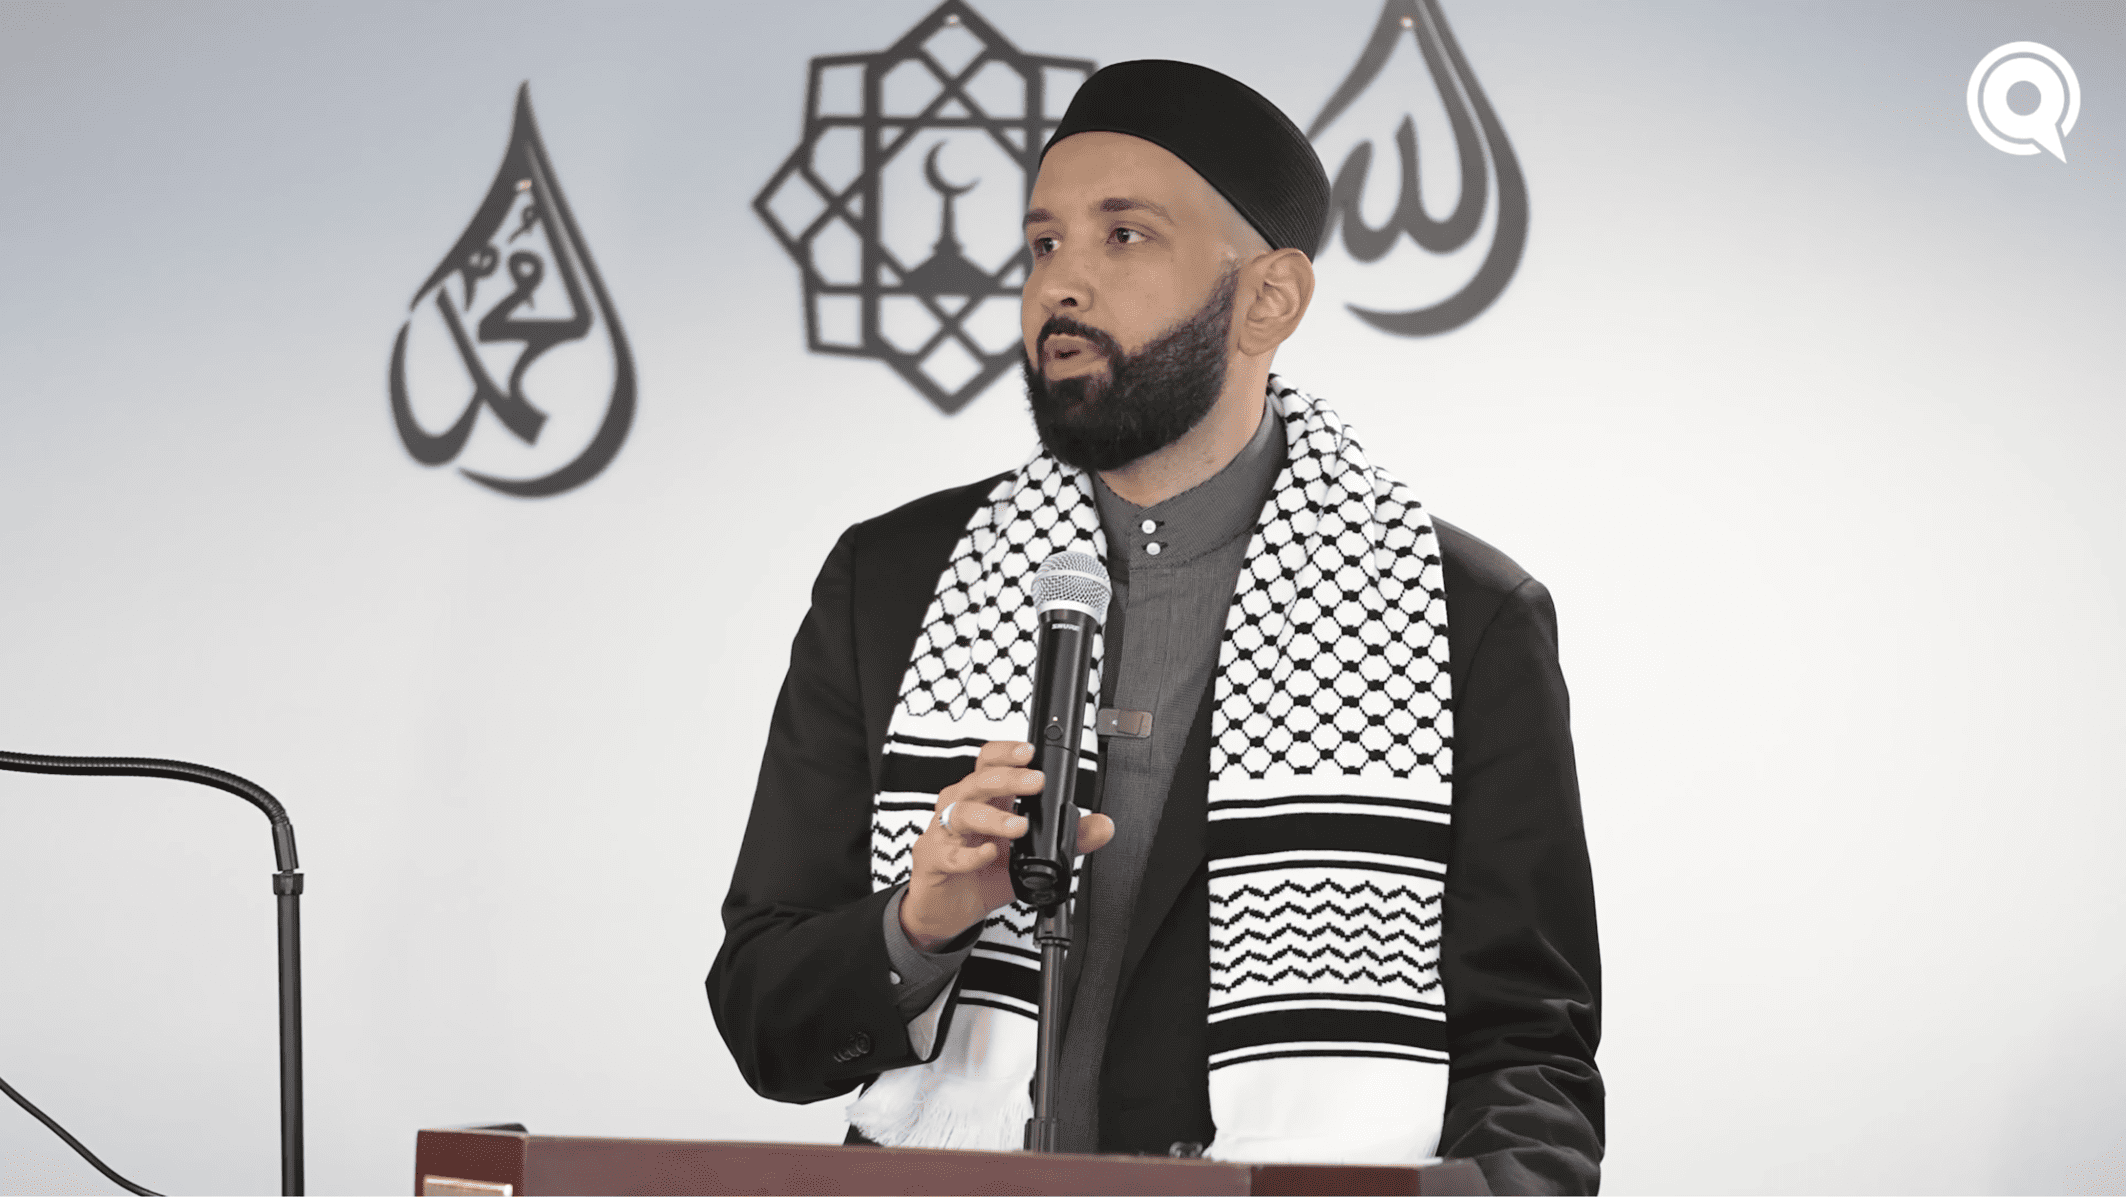 Omar Suleiman – How to Make This Your Best Ramadan